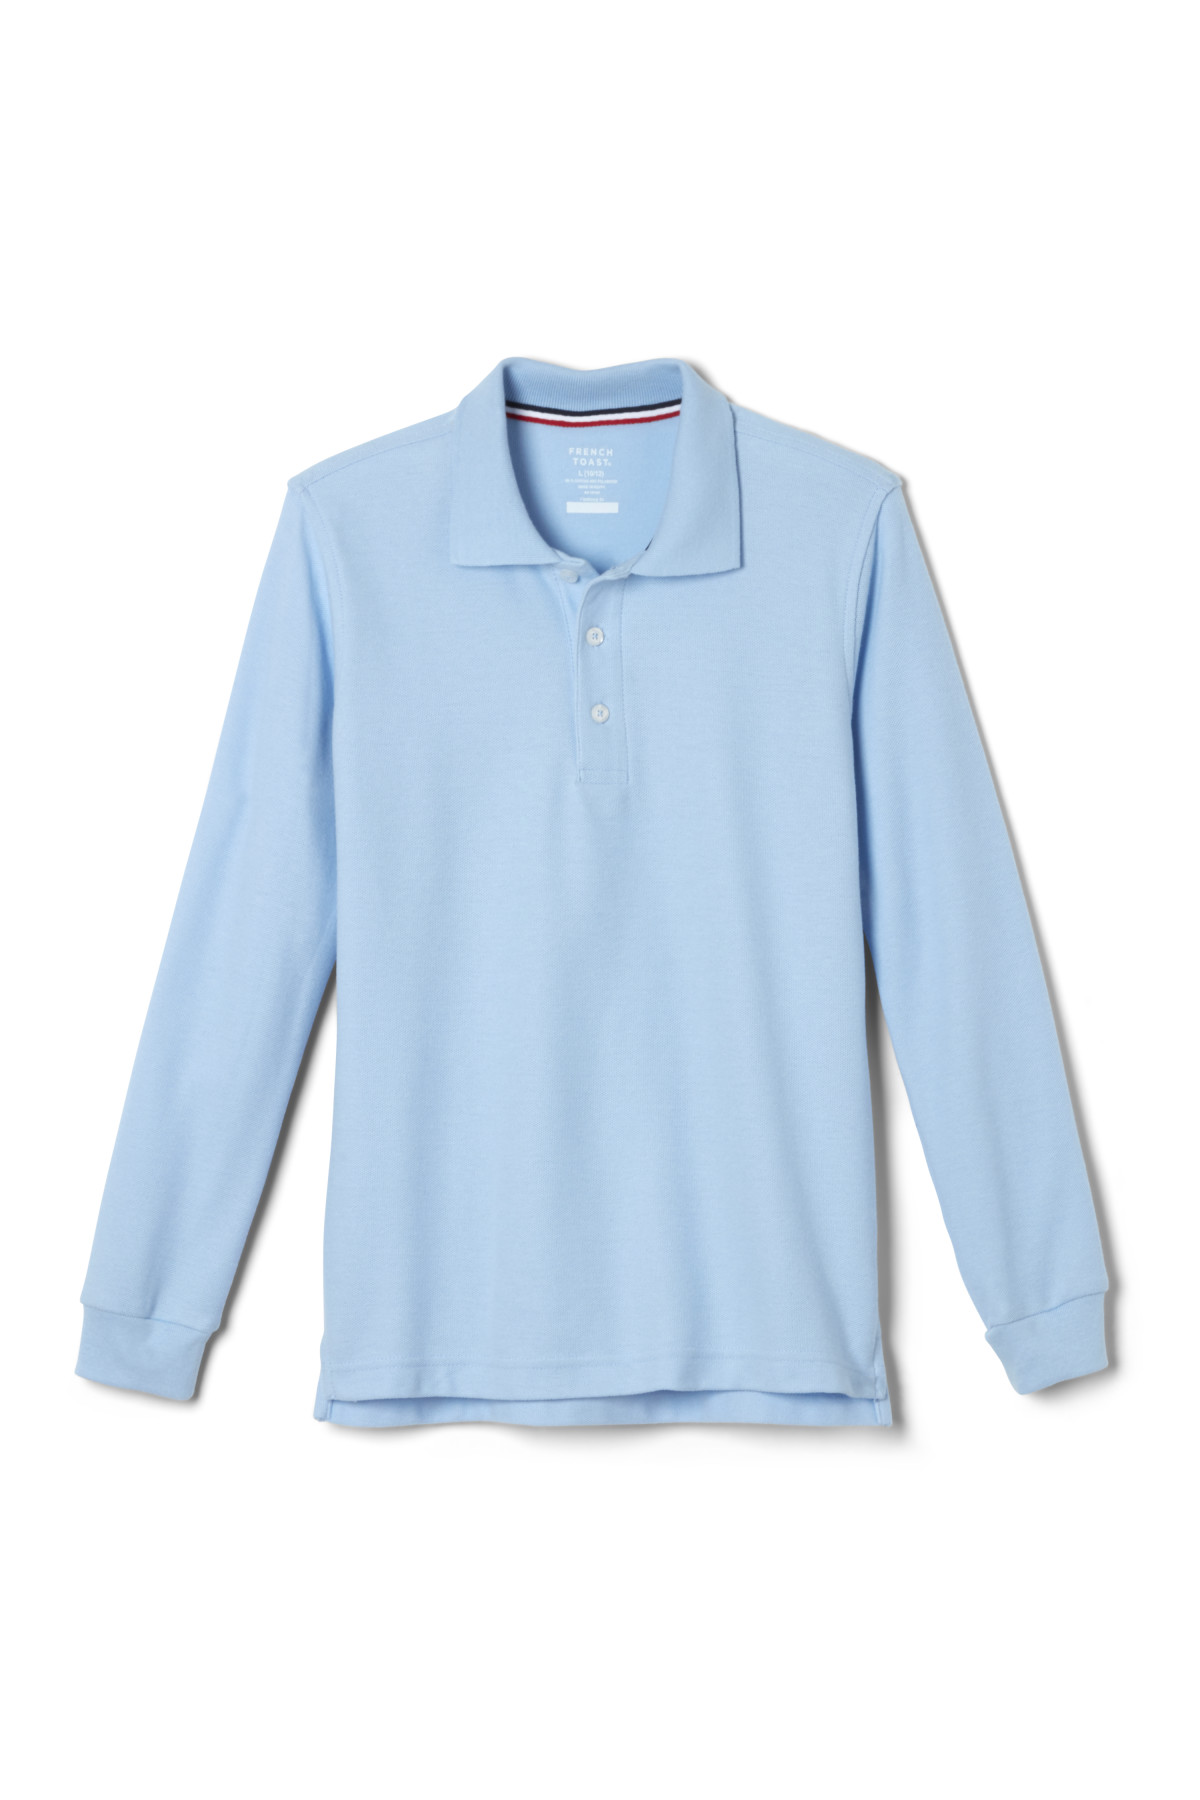 Long Sleeve Pique Coed Polo - French Toast